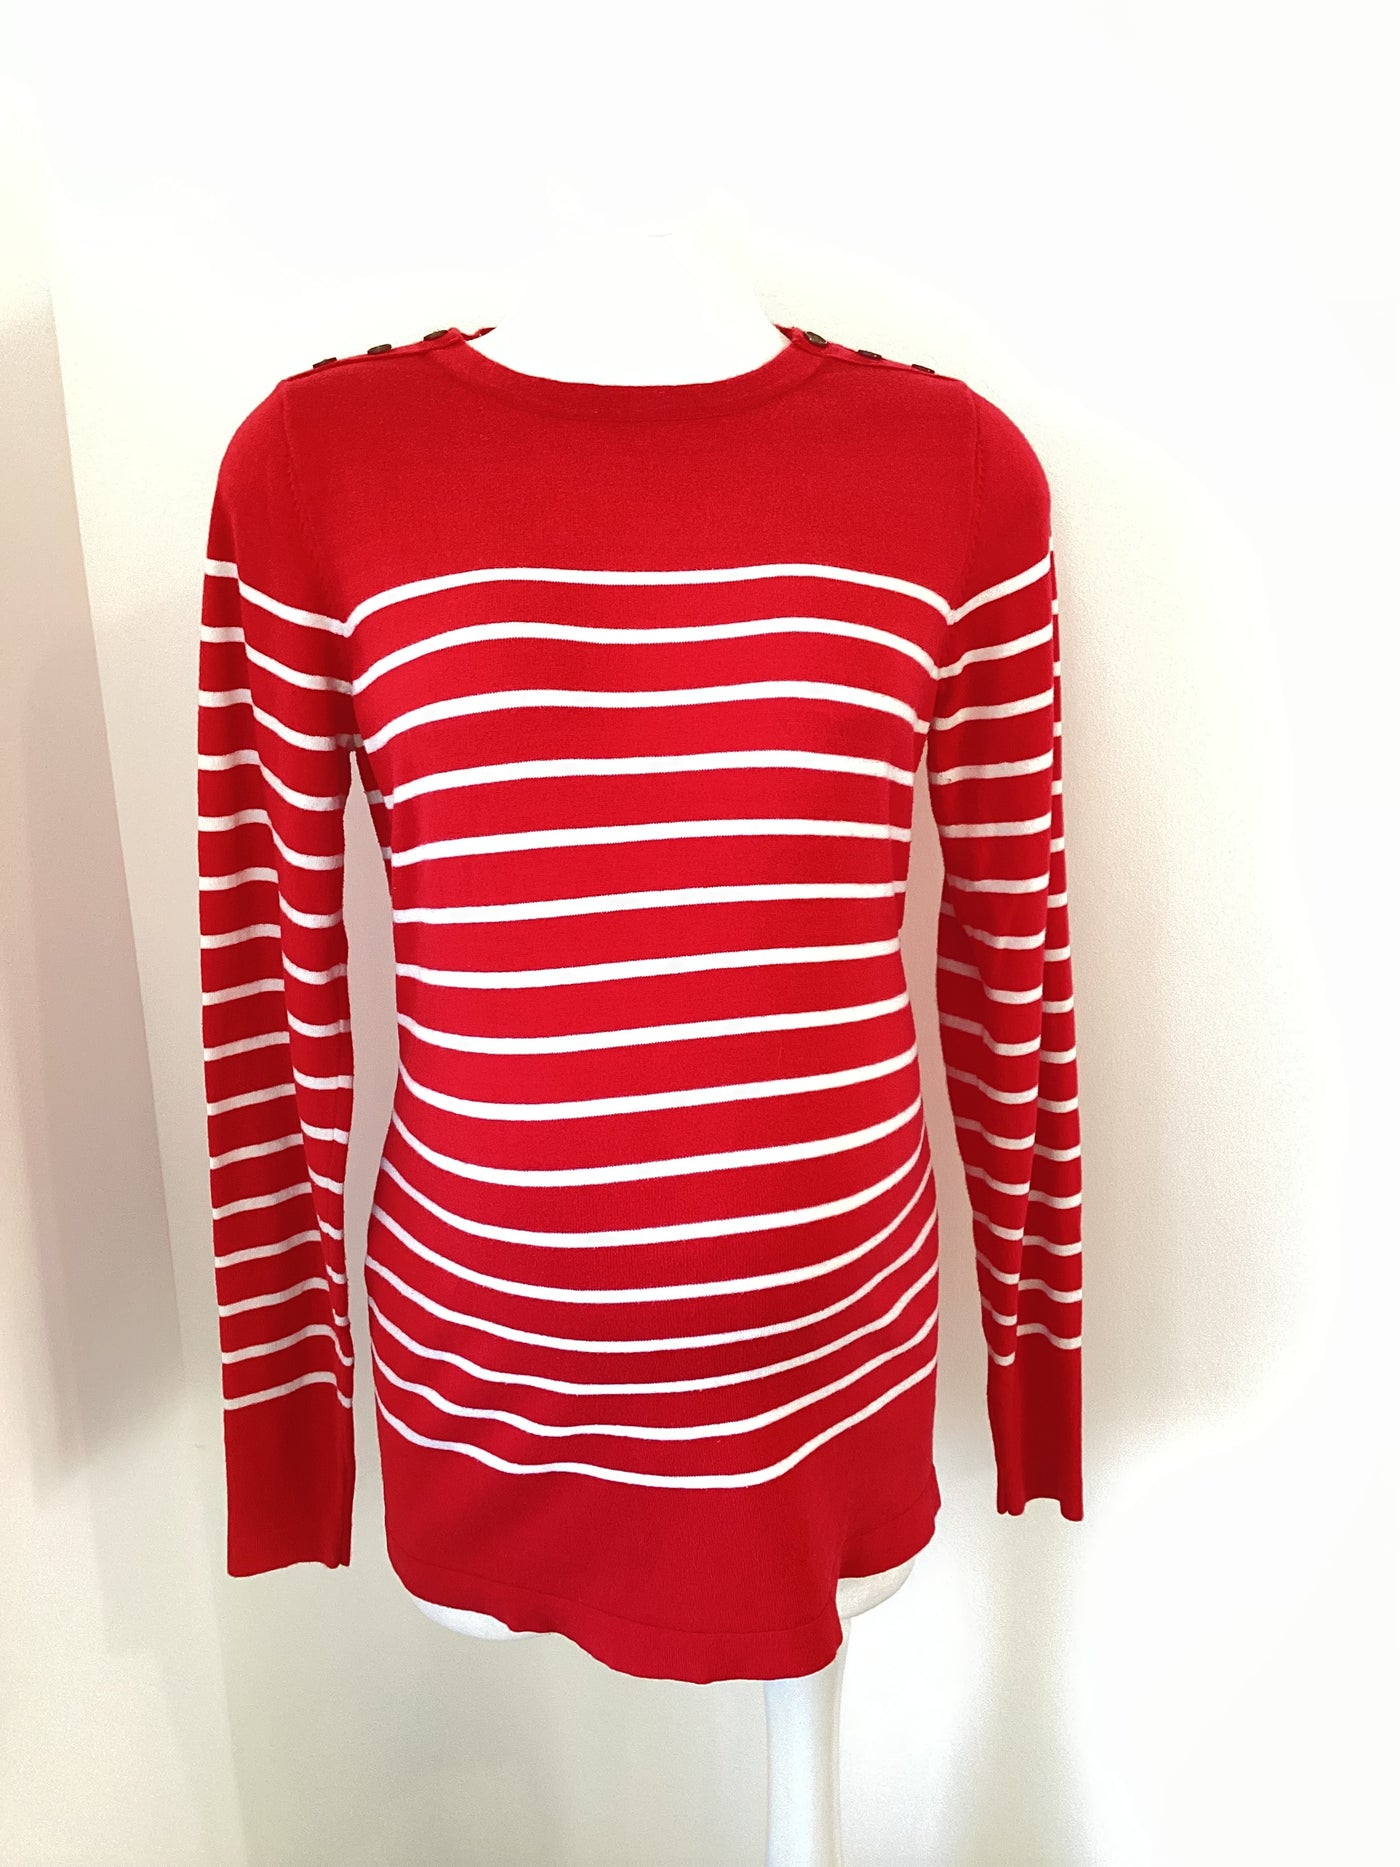 Jojo Maman Bebe red & white striped jumper with shoulder button detail - Size S (Approx UK 8/10)